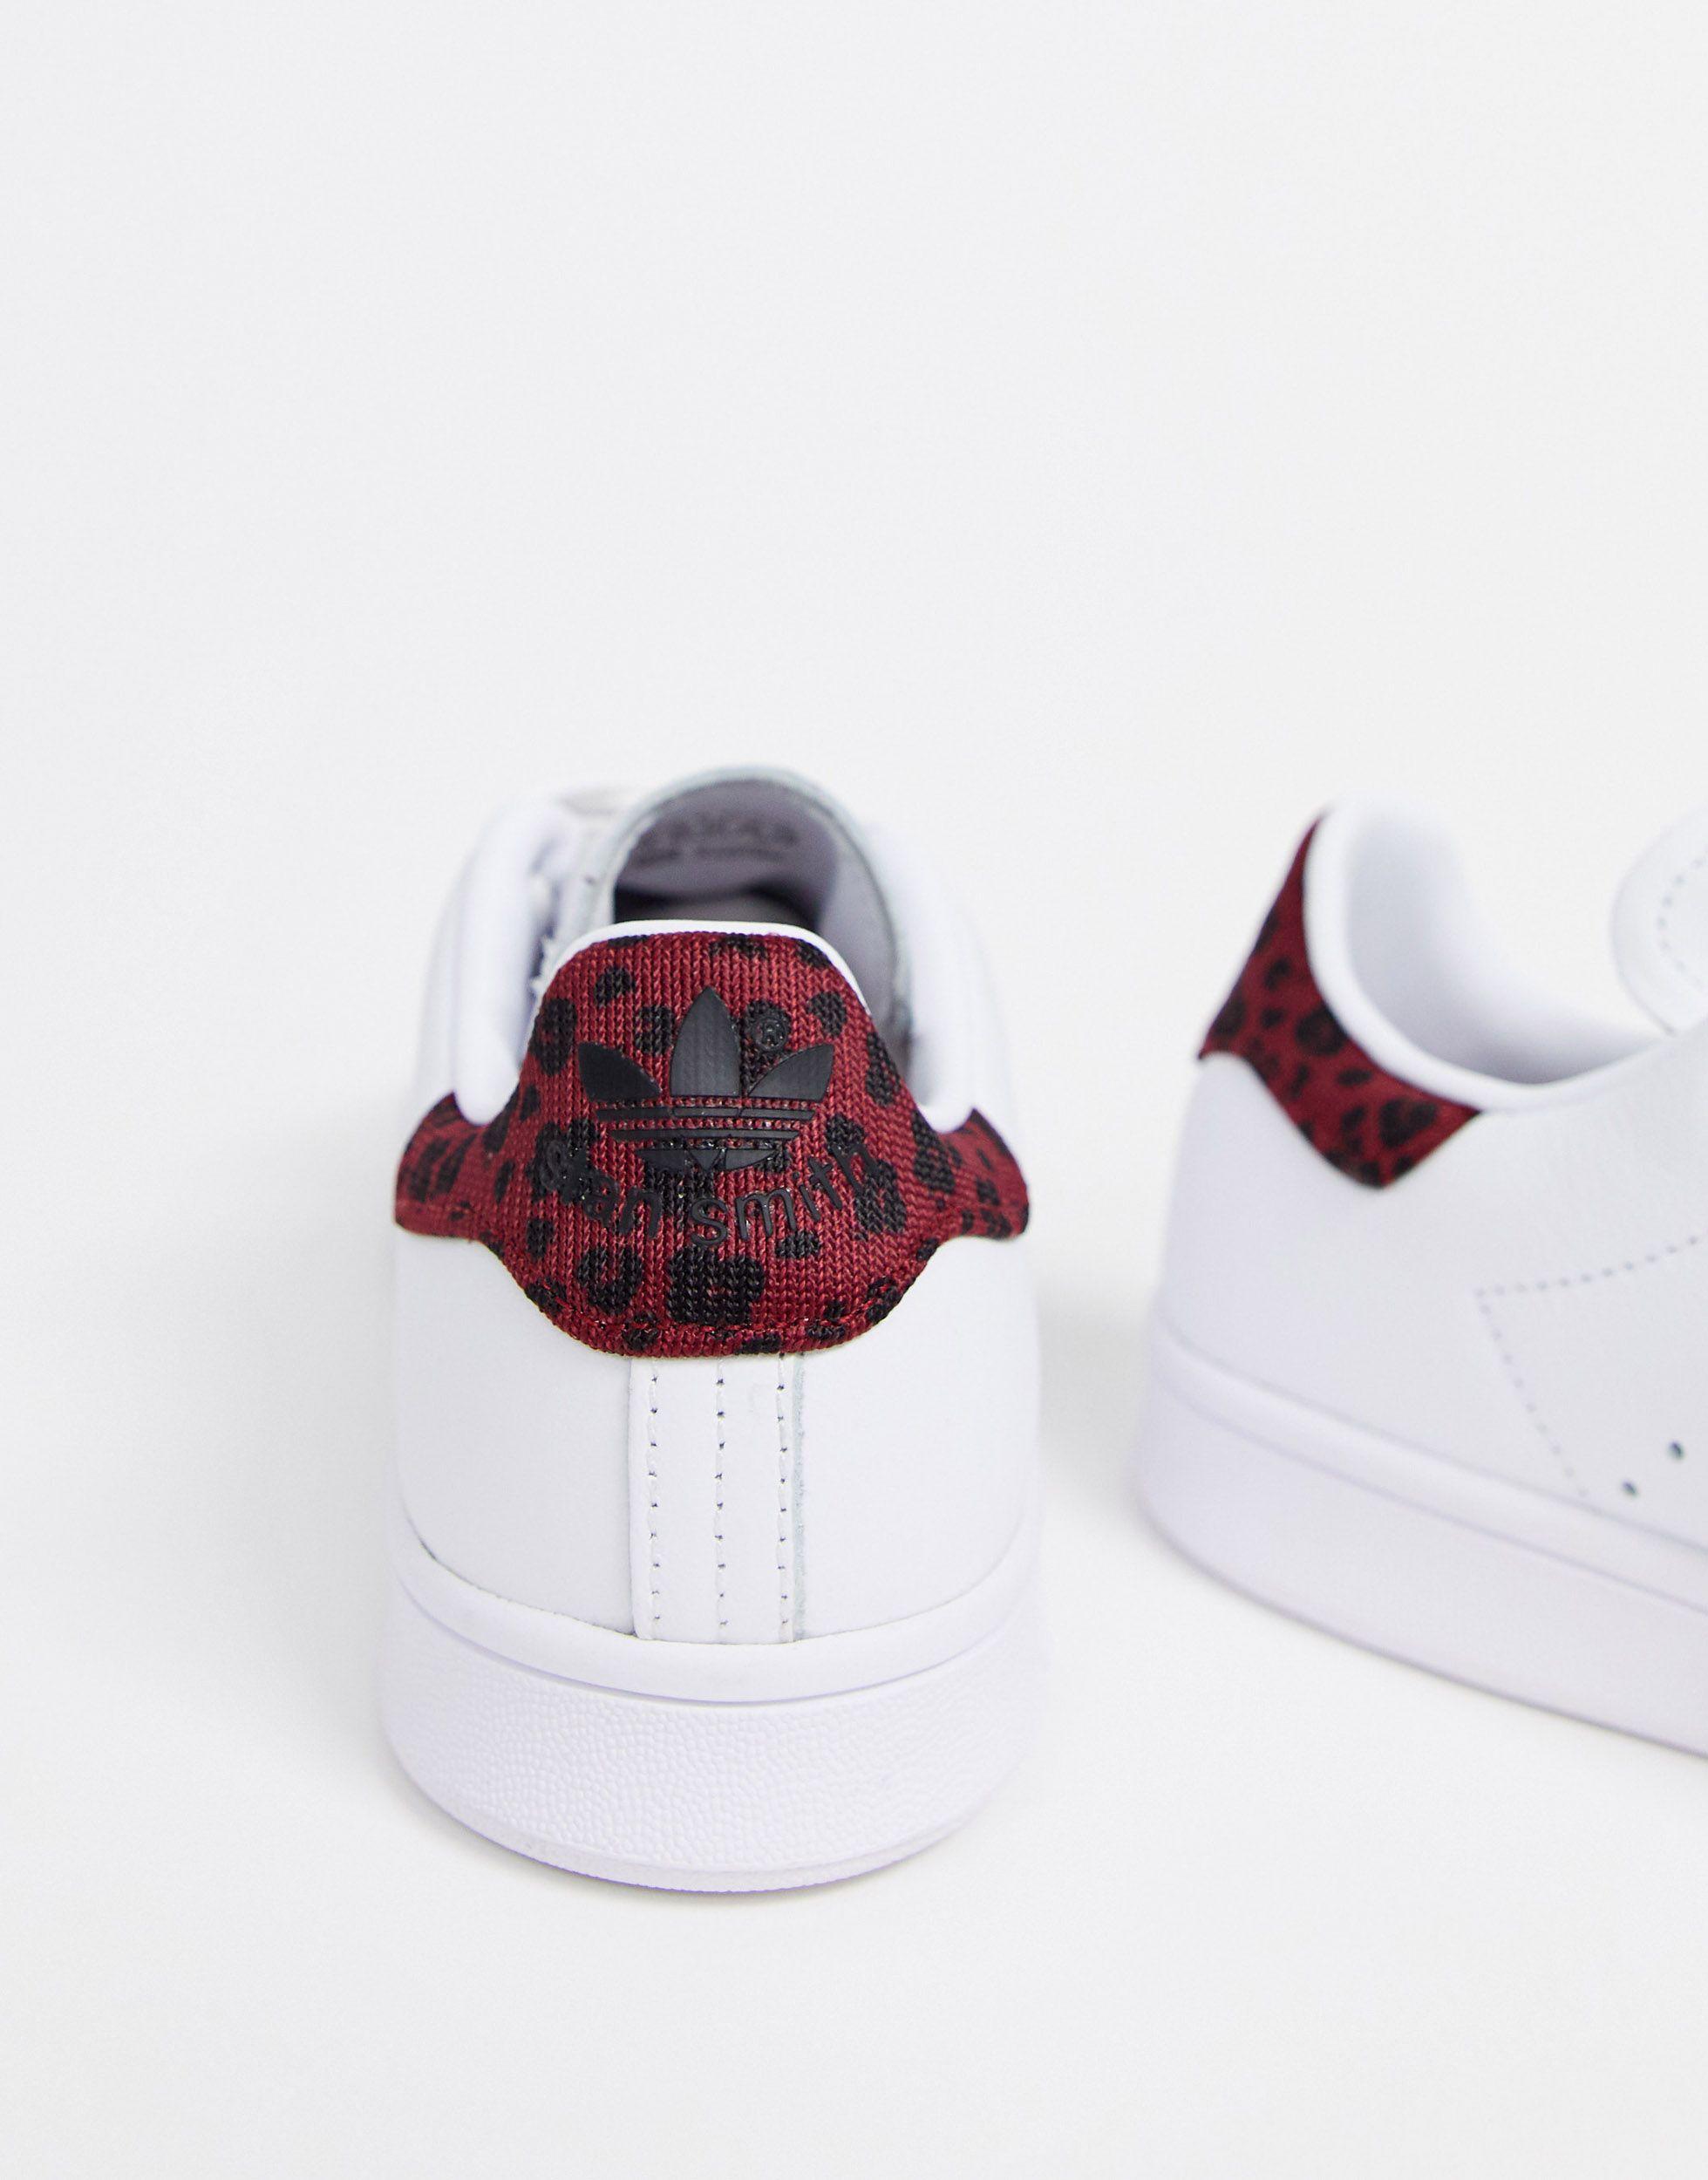 adidas Originals Leather Leopard Print Stan Smith Sneakers in White | Lyst